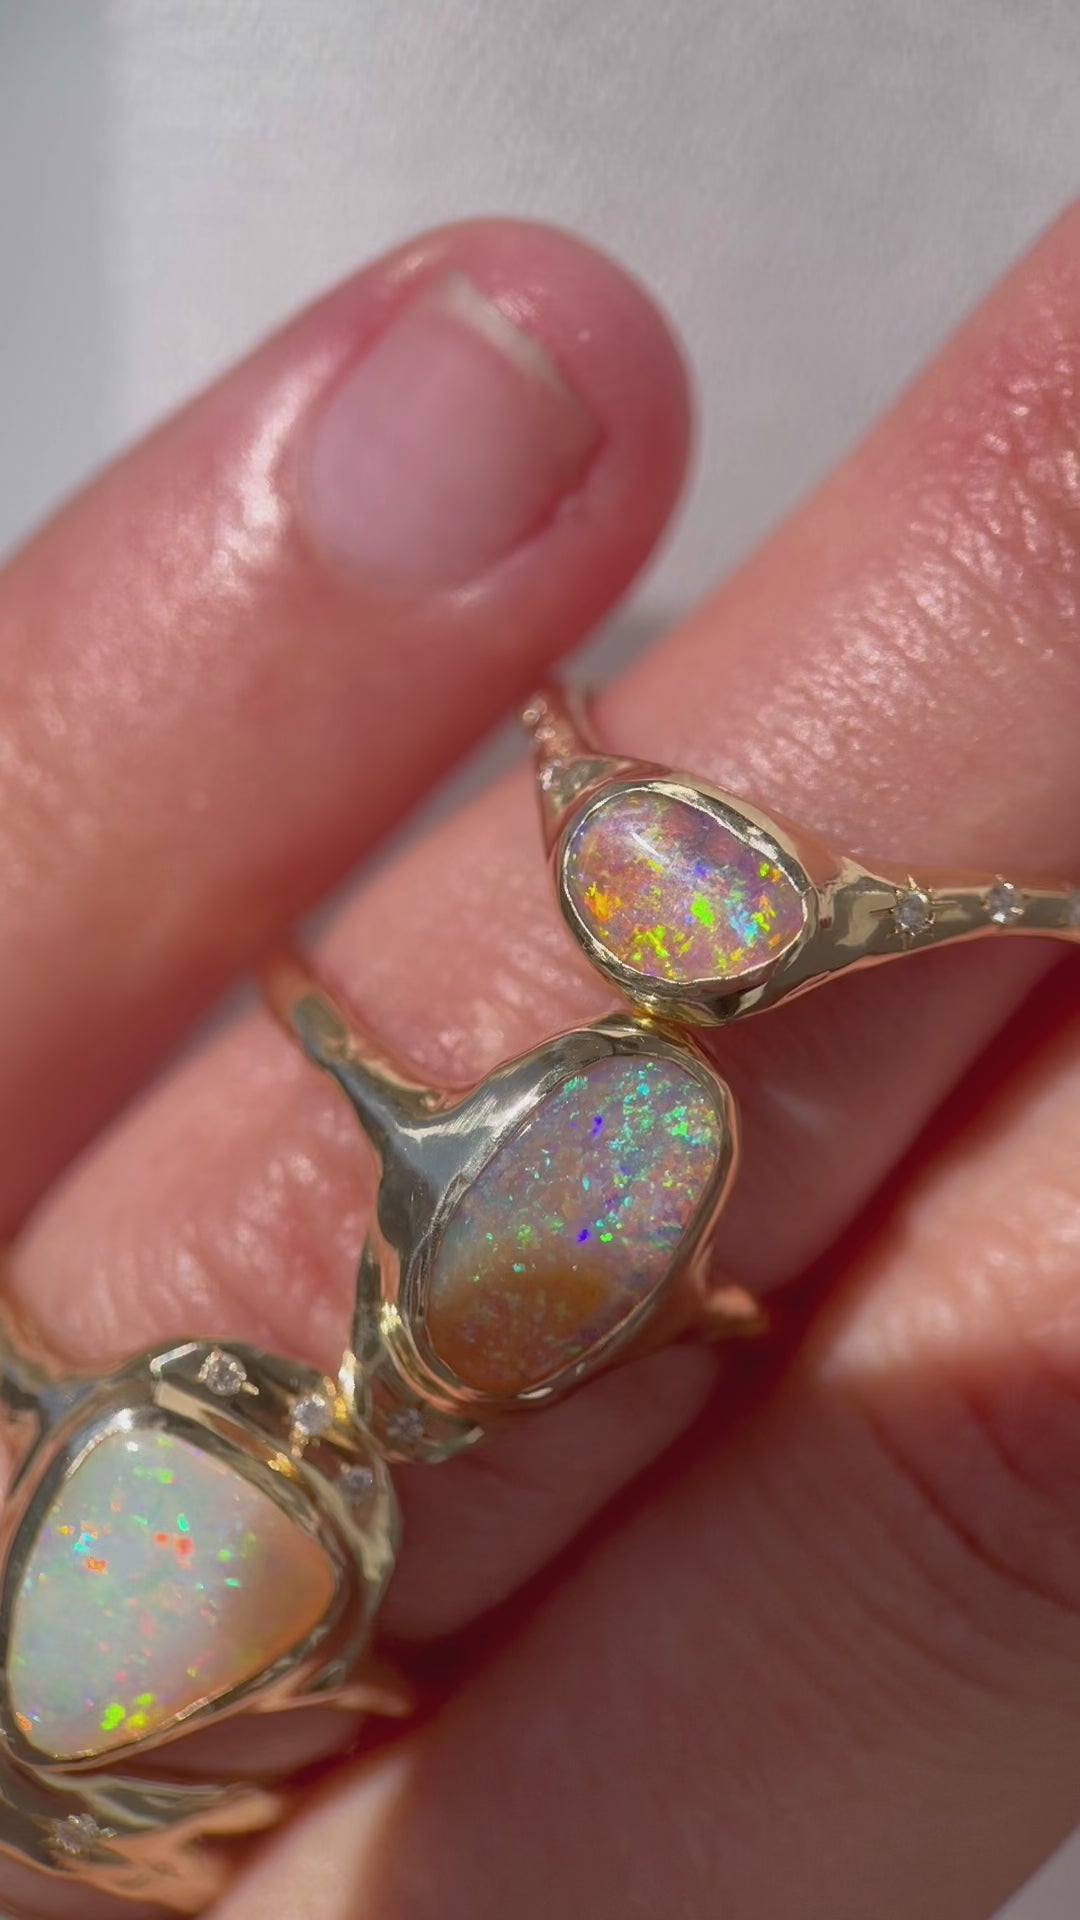 A close up video of unique opal rings worn to show color and size.